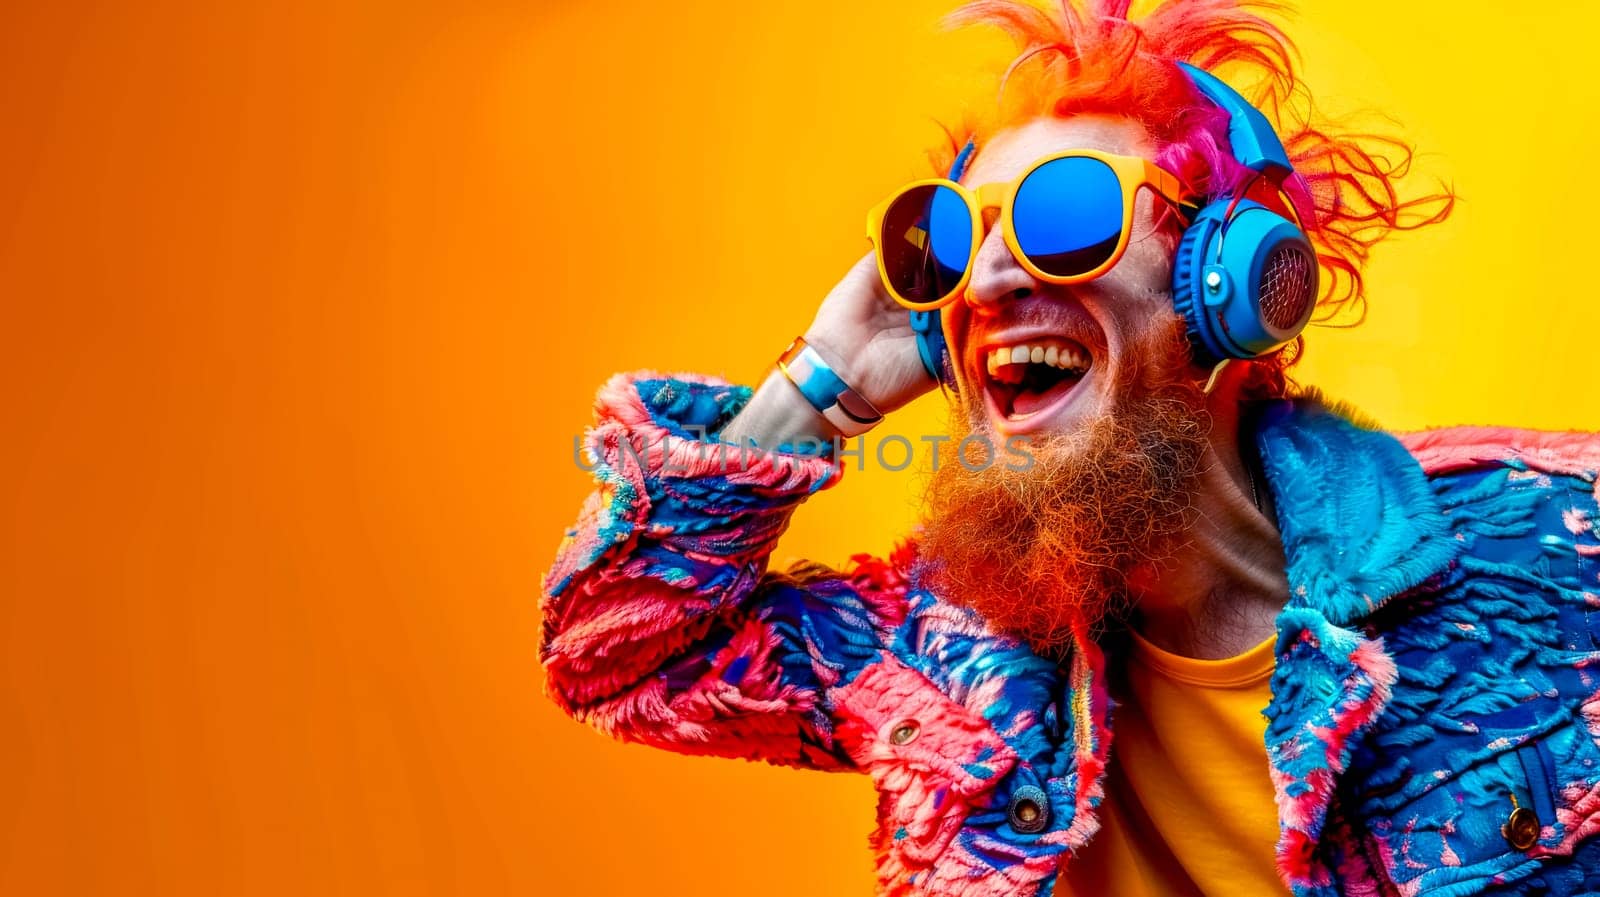 Vibrant man with colorful hair, headphones, and sunglasses lost in music